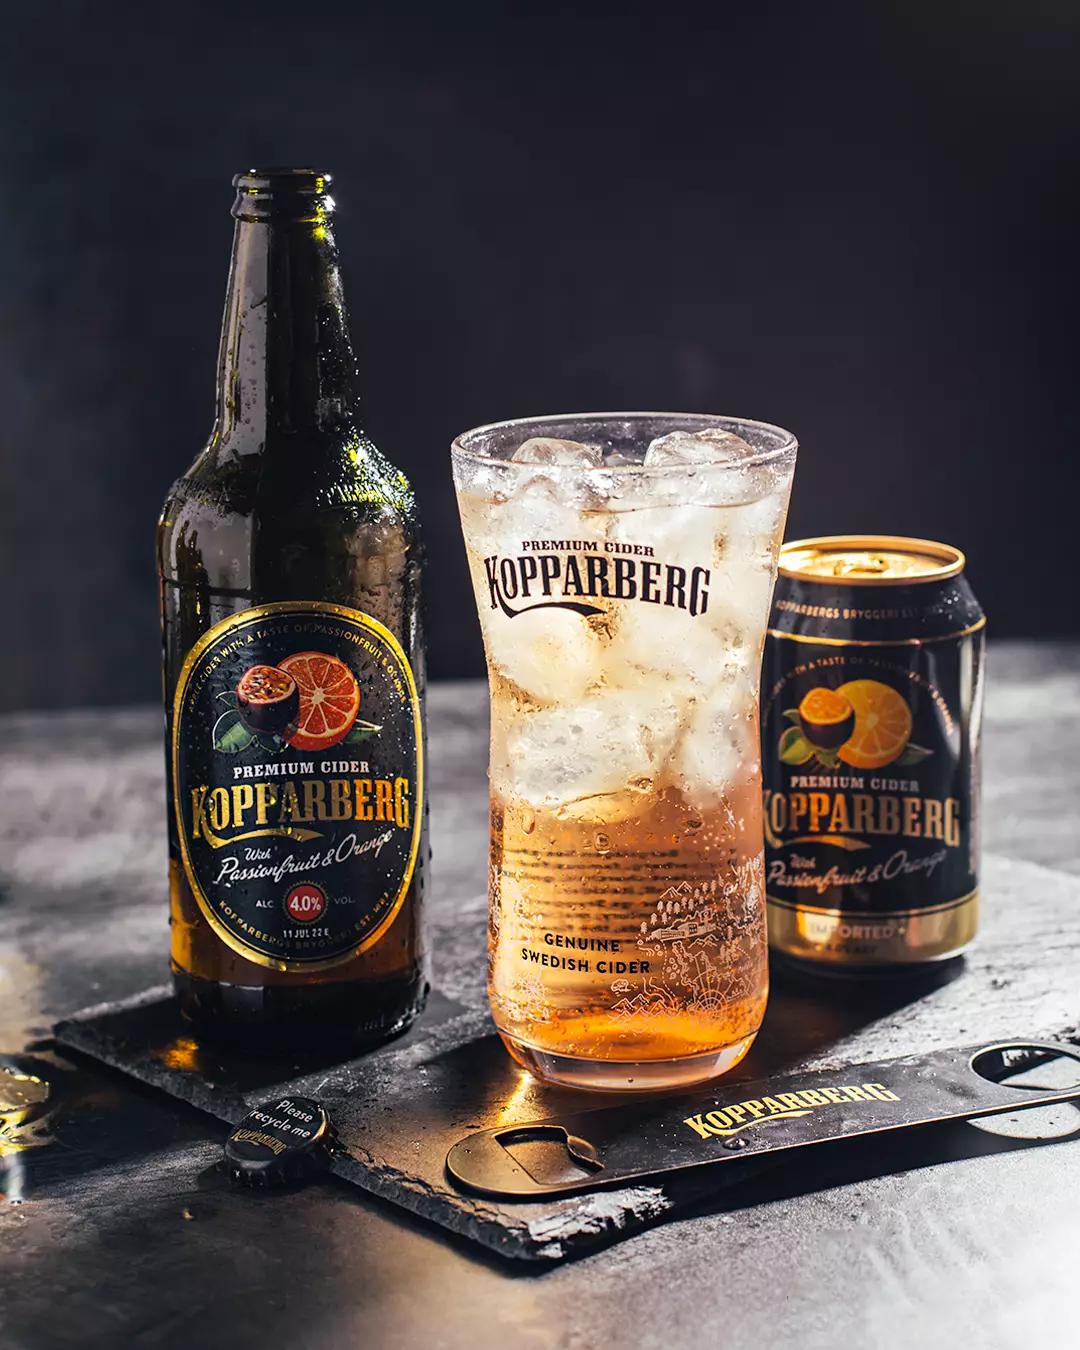 Kopparberg launched their passionfruit and orange flavoured gin in May last year and its popularity has led to a cider flavour (